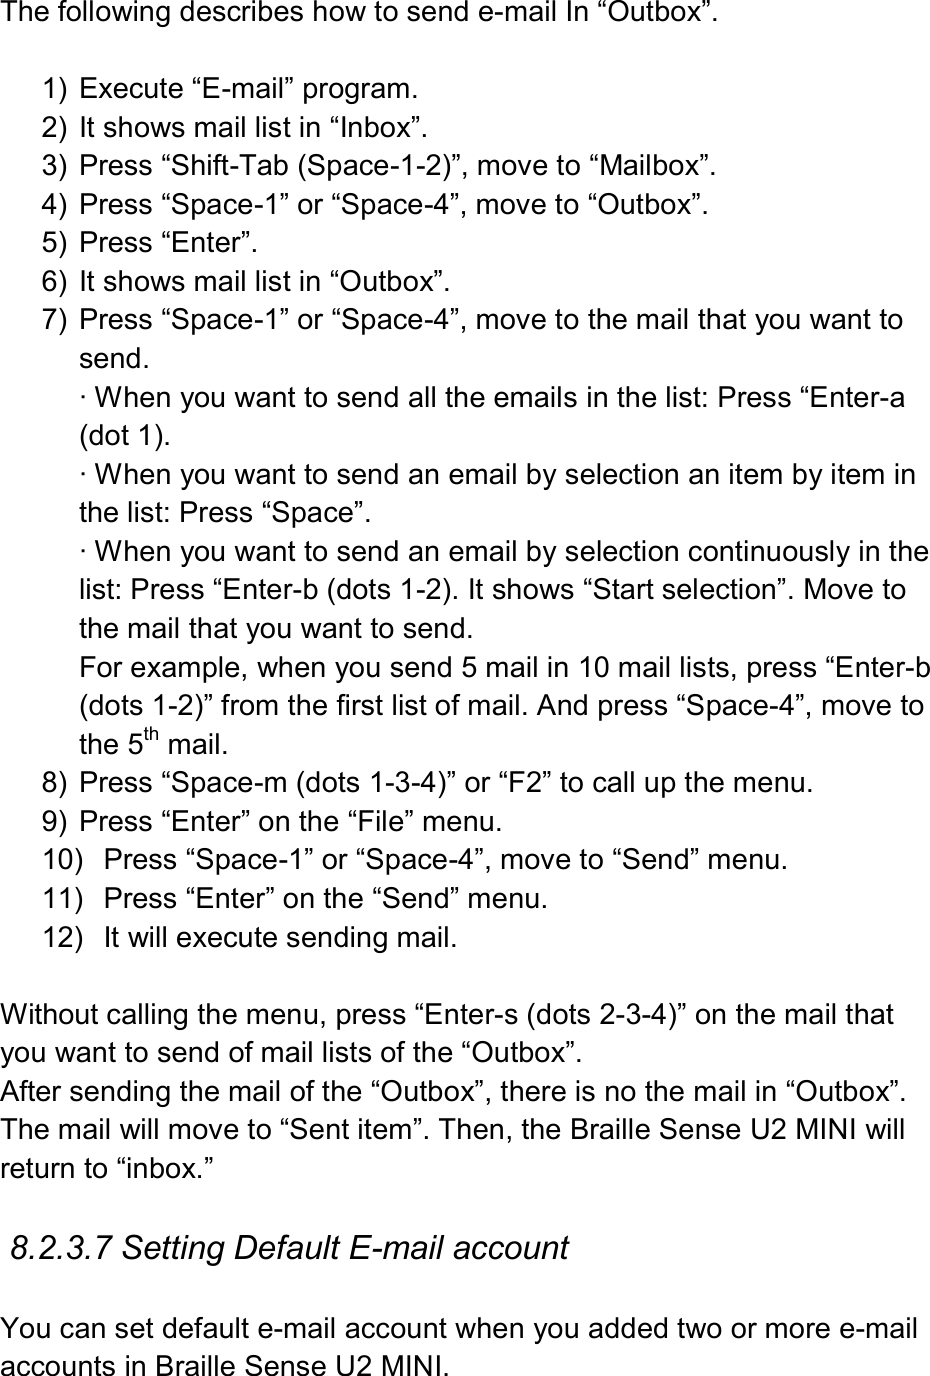  The following describes how to send e-mail In “Outbox”.  1)  Execute “E-mail” program. 2)  It shows mail list in “Inbox”. 3)  Press “Shift-Tab (Space-1-2)”, move to “Mailbox”. 4)  Press “Space-1” or “Space-4”, move to “Outbox”. 5)  Press “Enter”. 6)  It shows mail list in “Outbox”.   7)  Press “Space-1” or “Space-4”, move to the mail that you want to send. ∙ When you want to send all the emails in the list: Press “Enter-a (dot 1). ∙ When you want to send an email by selection an item by item in the list: Press “Space”. ∙ When you want to send an email by selection continuously in the list: Press “Enter-b (dots 1-2). It shows “Start selection”. Move to the mail that you want to send.   For example, when you send 5 mail in 10 mail lists, press “Enter-b (dots 1-2)” from the first list of mail. And press “Space-4”, move to the 5th mail. 8)  Press “Space-m (dots 1-3-4)” or “F2” to call up the menu. 9)  Press “Enter” on the “File” menu. 10)  Press “Space-1” or “Space-4”, move to “Send” menu. 11)  Press “Enter” on the “Send” menu. 12)  It will execute sending mail.  Without calling the menu, press “Enter-s (dots 2-3-4)” on the mail that you want to send of mail lists of the “Outbox”. After sending the mail of the “Outbox”, there is no the mail in “Outbox”. The mail will move to “Sent item”. Then, the Braille Sense U2 MINI will return to “inbox.”  8.2.3.7 Setting Default E-mail account  You can set default e-mail account when you added two or more e-mail accounts in Braille Sense U2 MINI.   